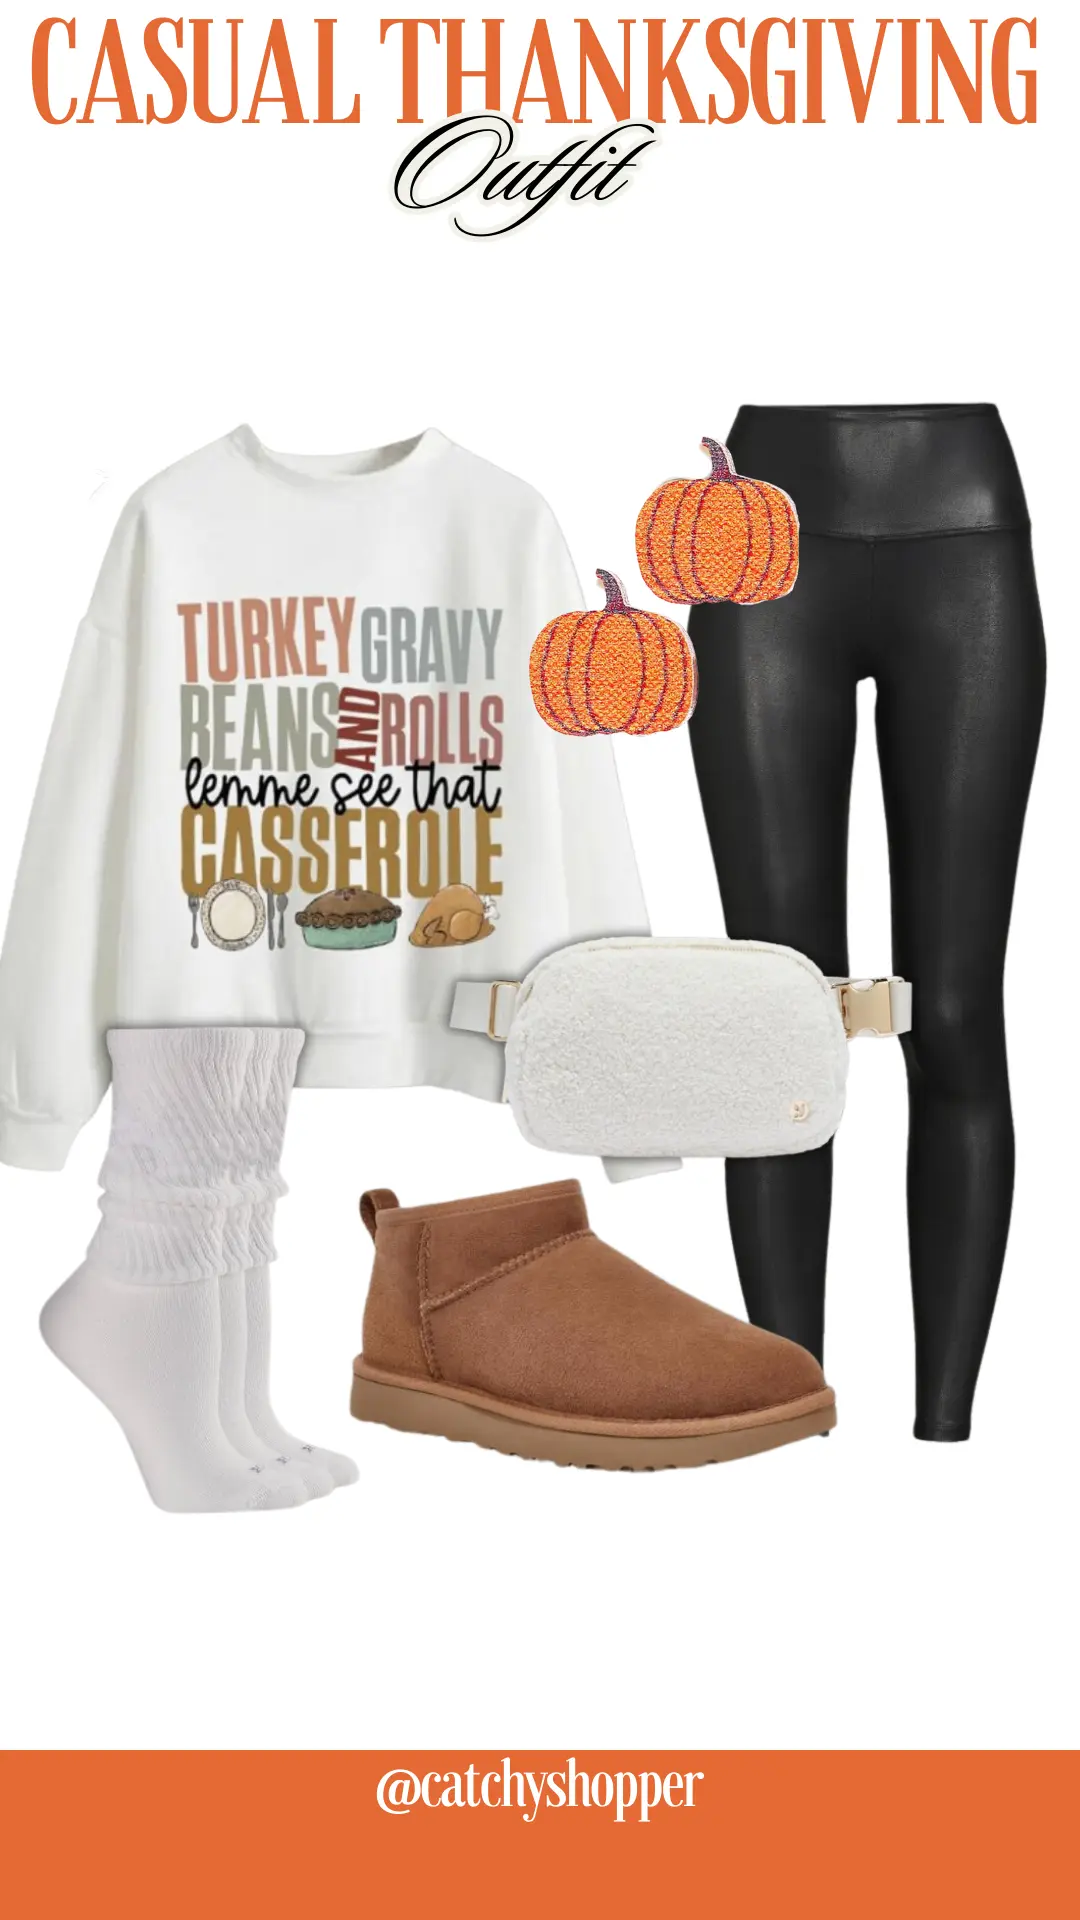 Casual Thanksgiving Outfit